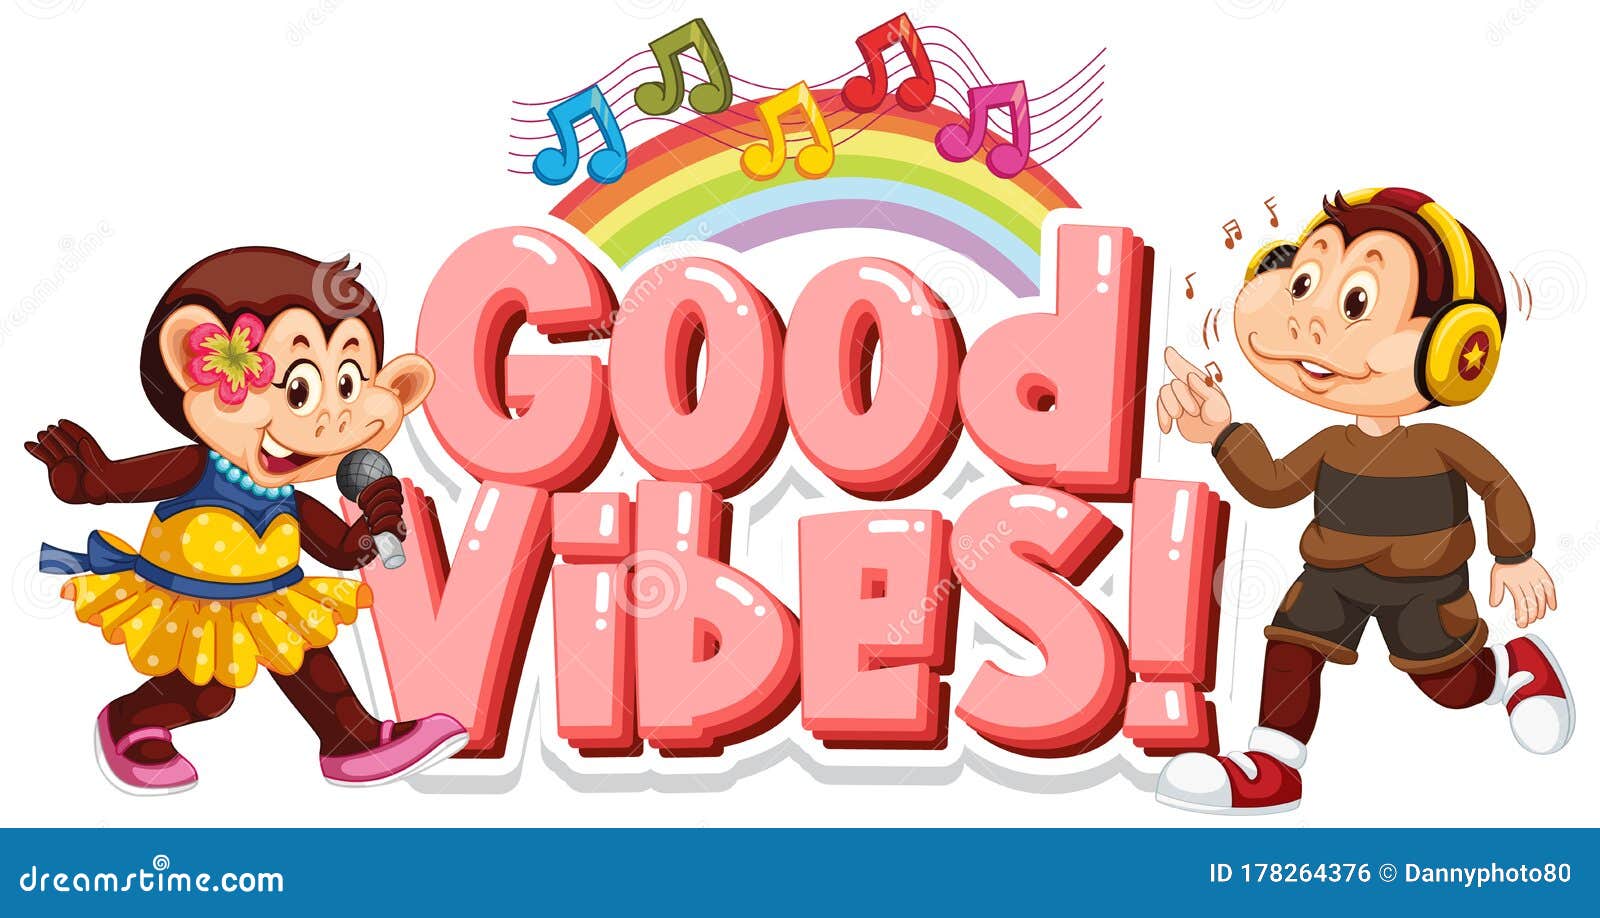 Font design for word good vibes with monkeys singing and dancing illustration